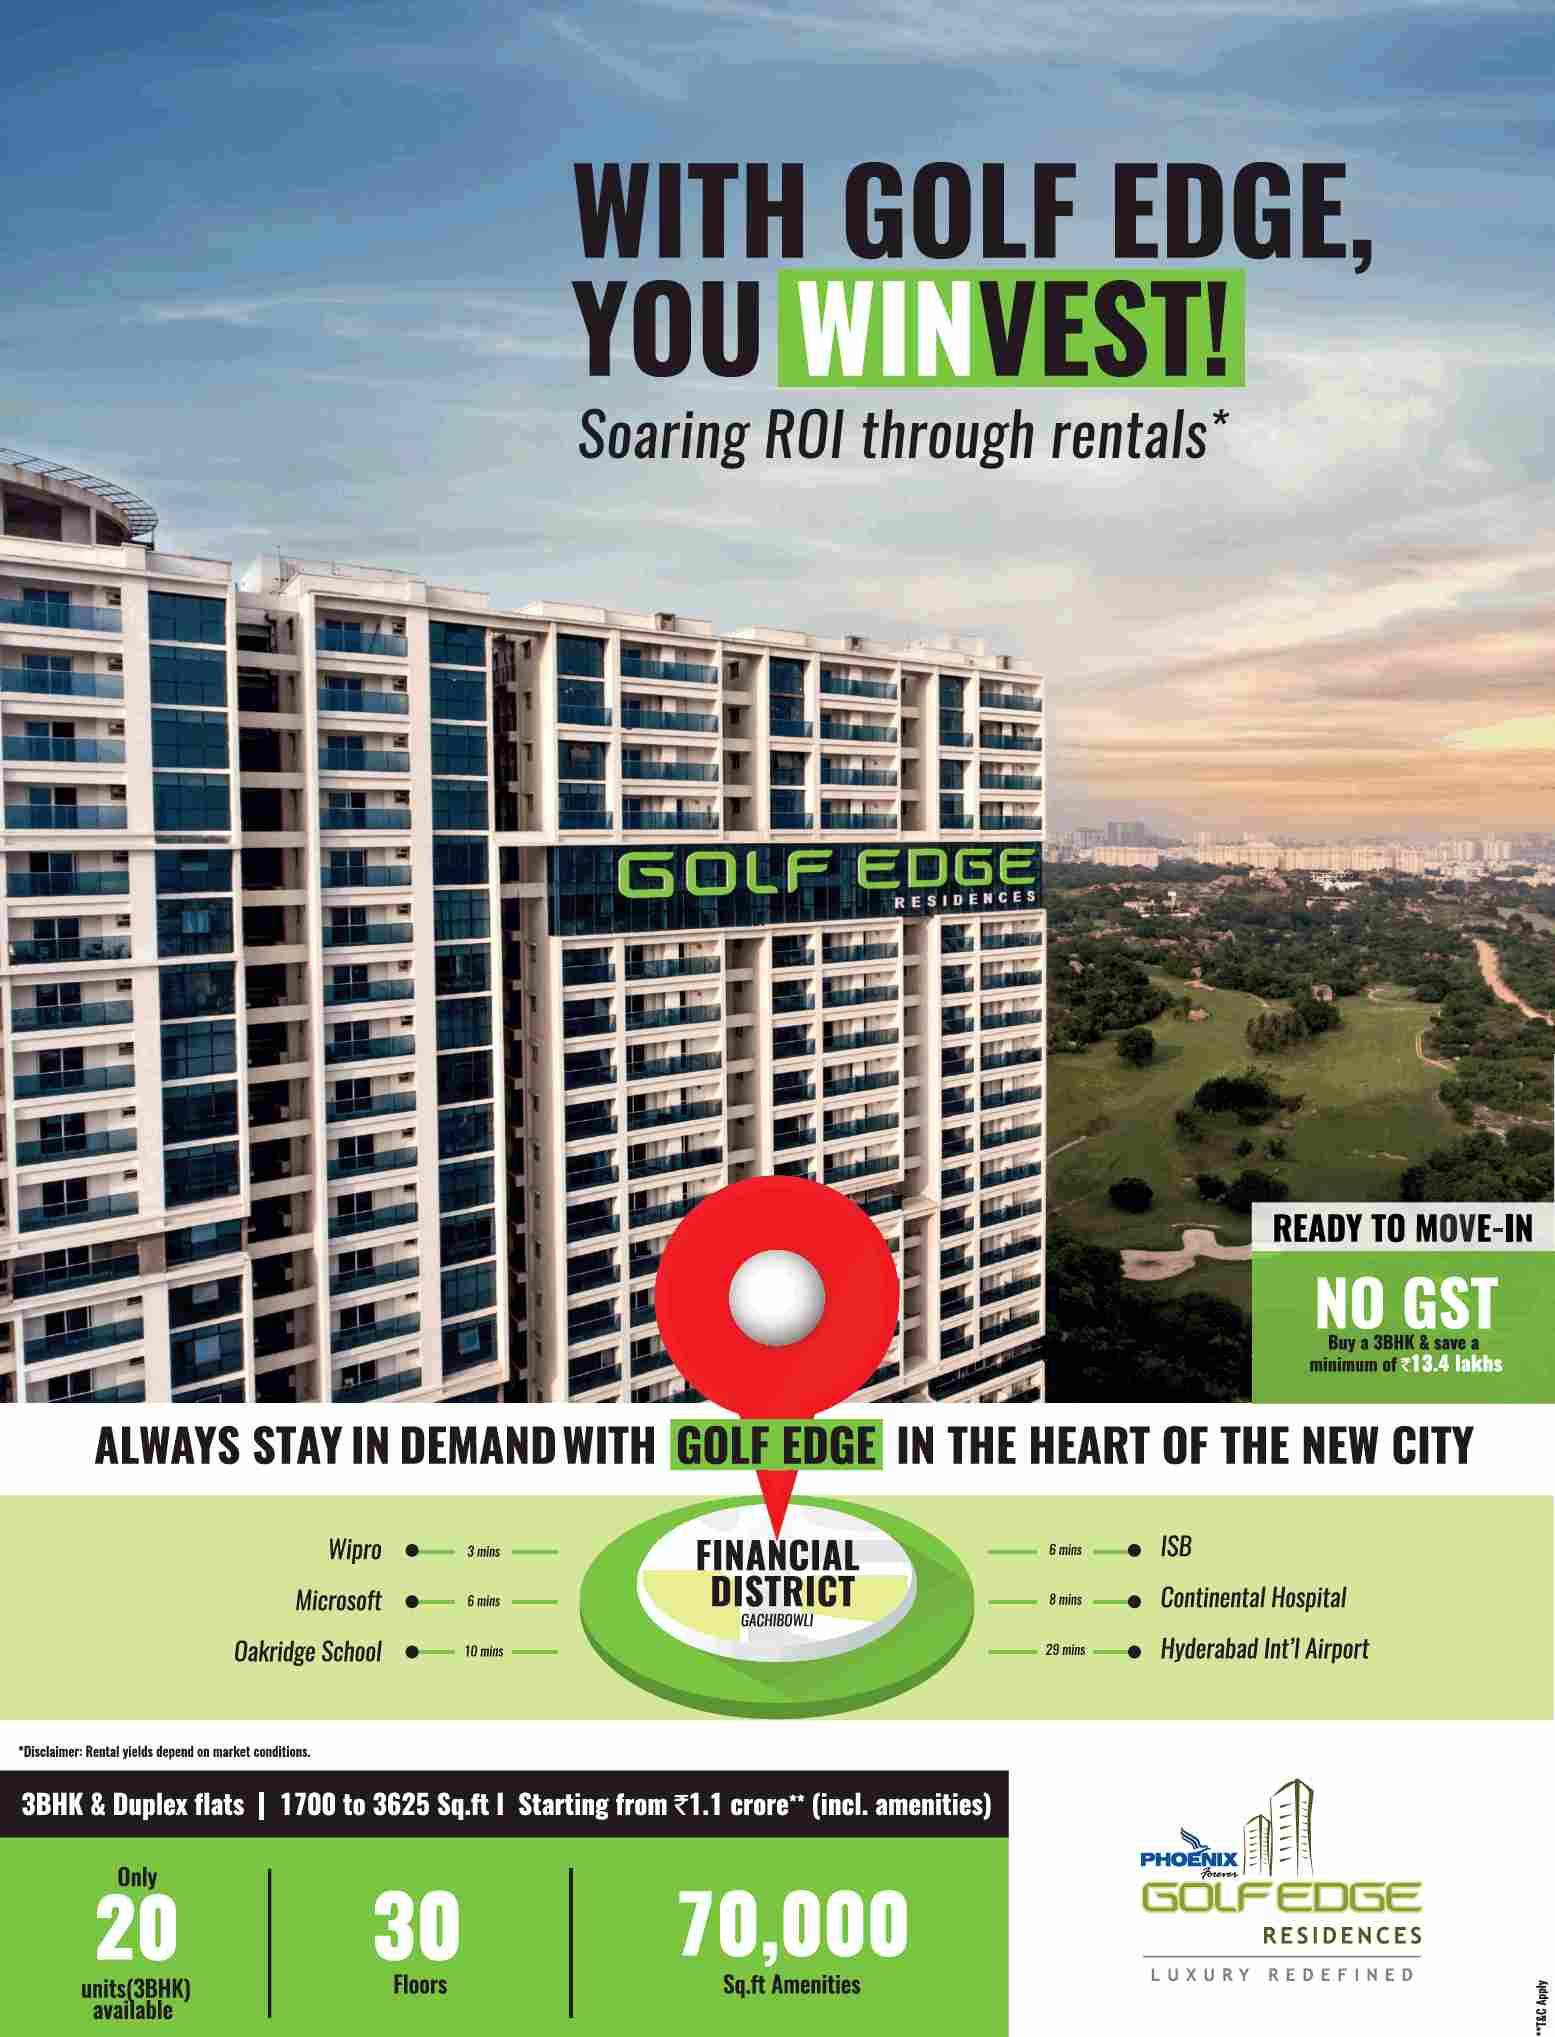 Buy a 3 BHK and save a minimum of Rs. 13.4 Lakhs at Phoenix Golf Edge in Hyderabad Update